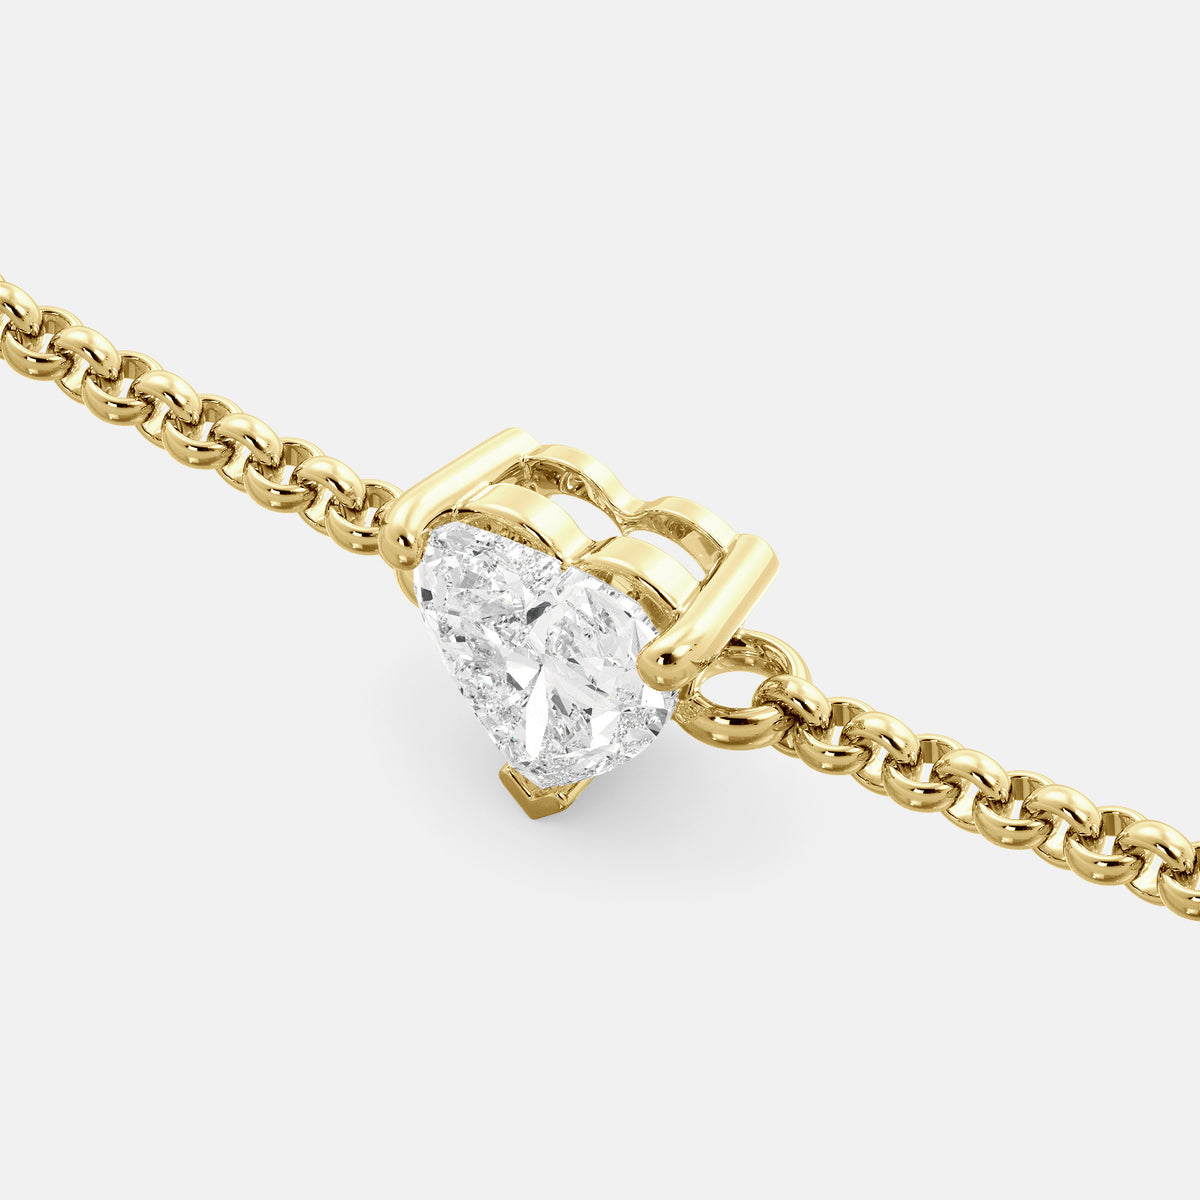 A close-up of a heart-shaped diamond bracelet in recycled yellow gold. The bracelet is set with a single, large diamond in the center of a heart-shaped pendant. The bracelet is made of recycled yellow gold and has a simple, elegant design. The diamond is sparkling and reflects light beautifully. The bracelet is a perfect gift for a loved one or a special occasion.